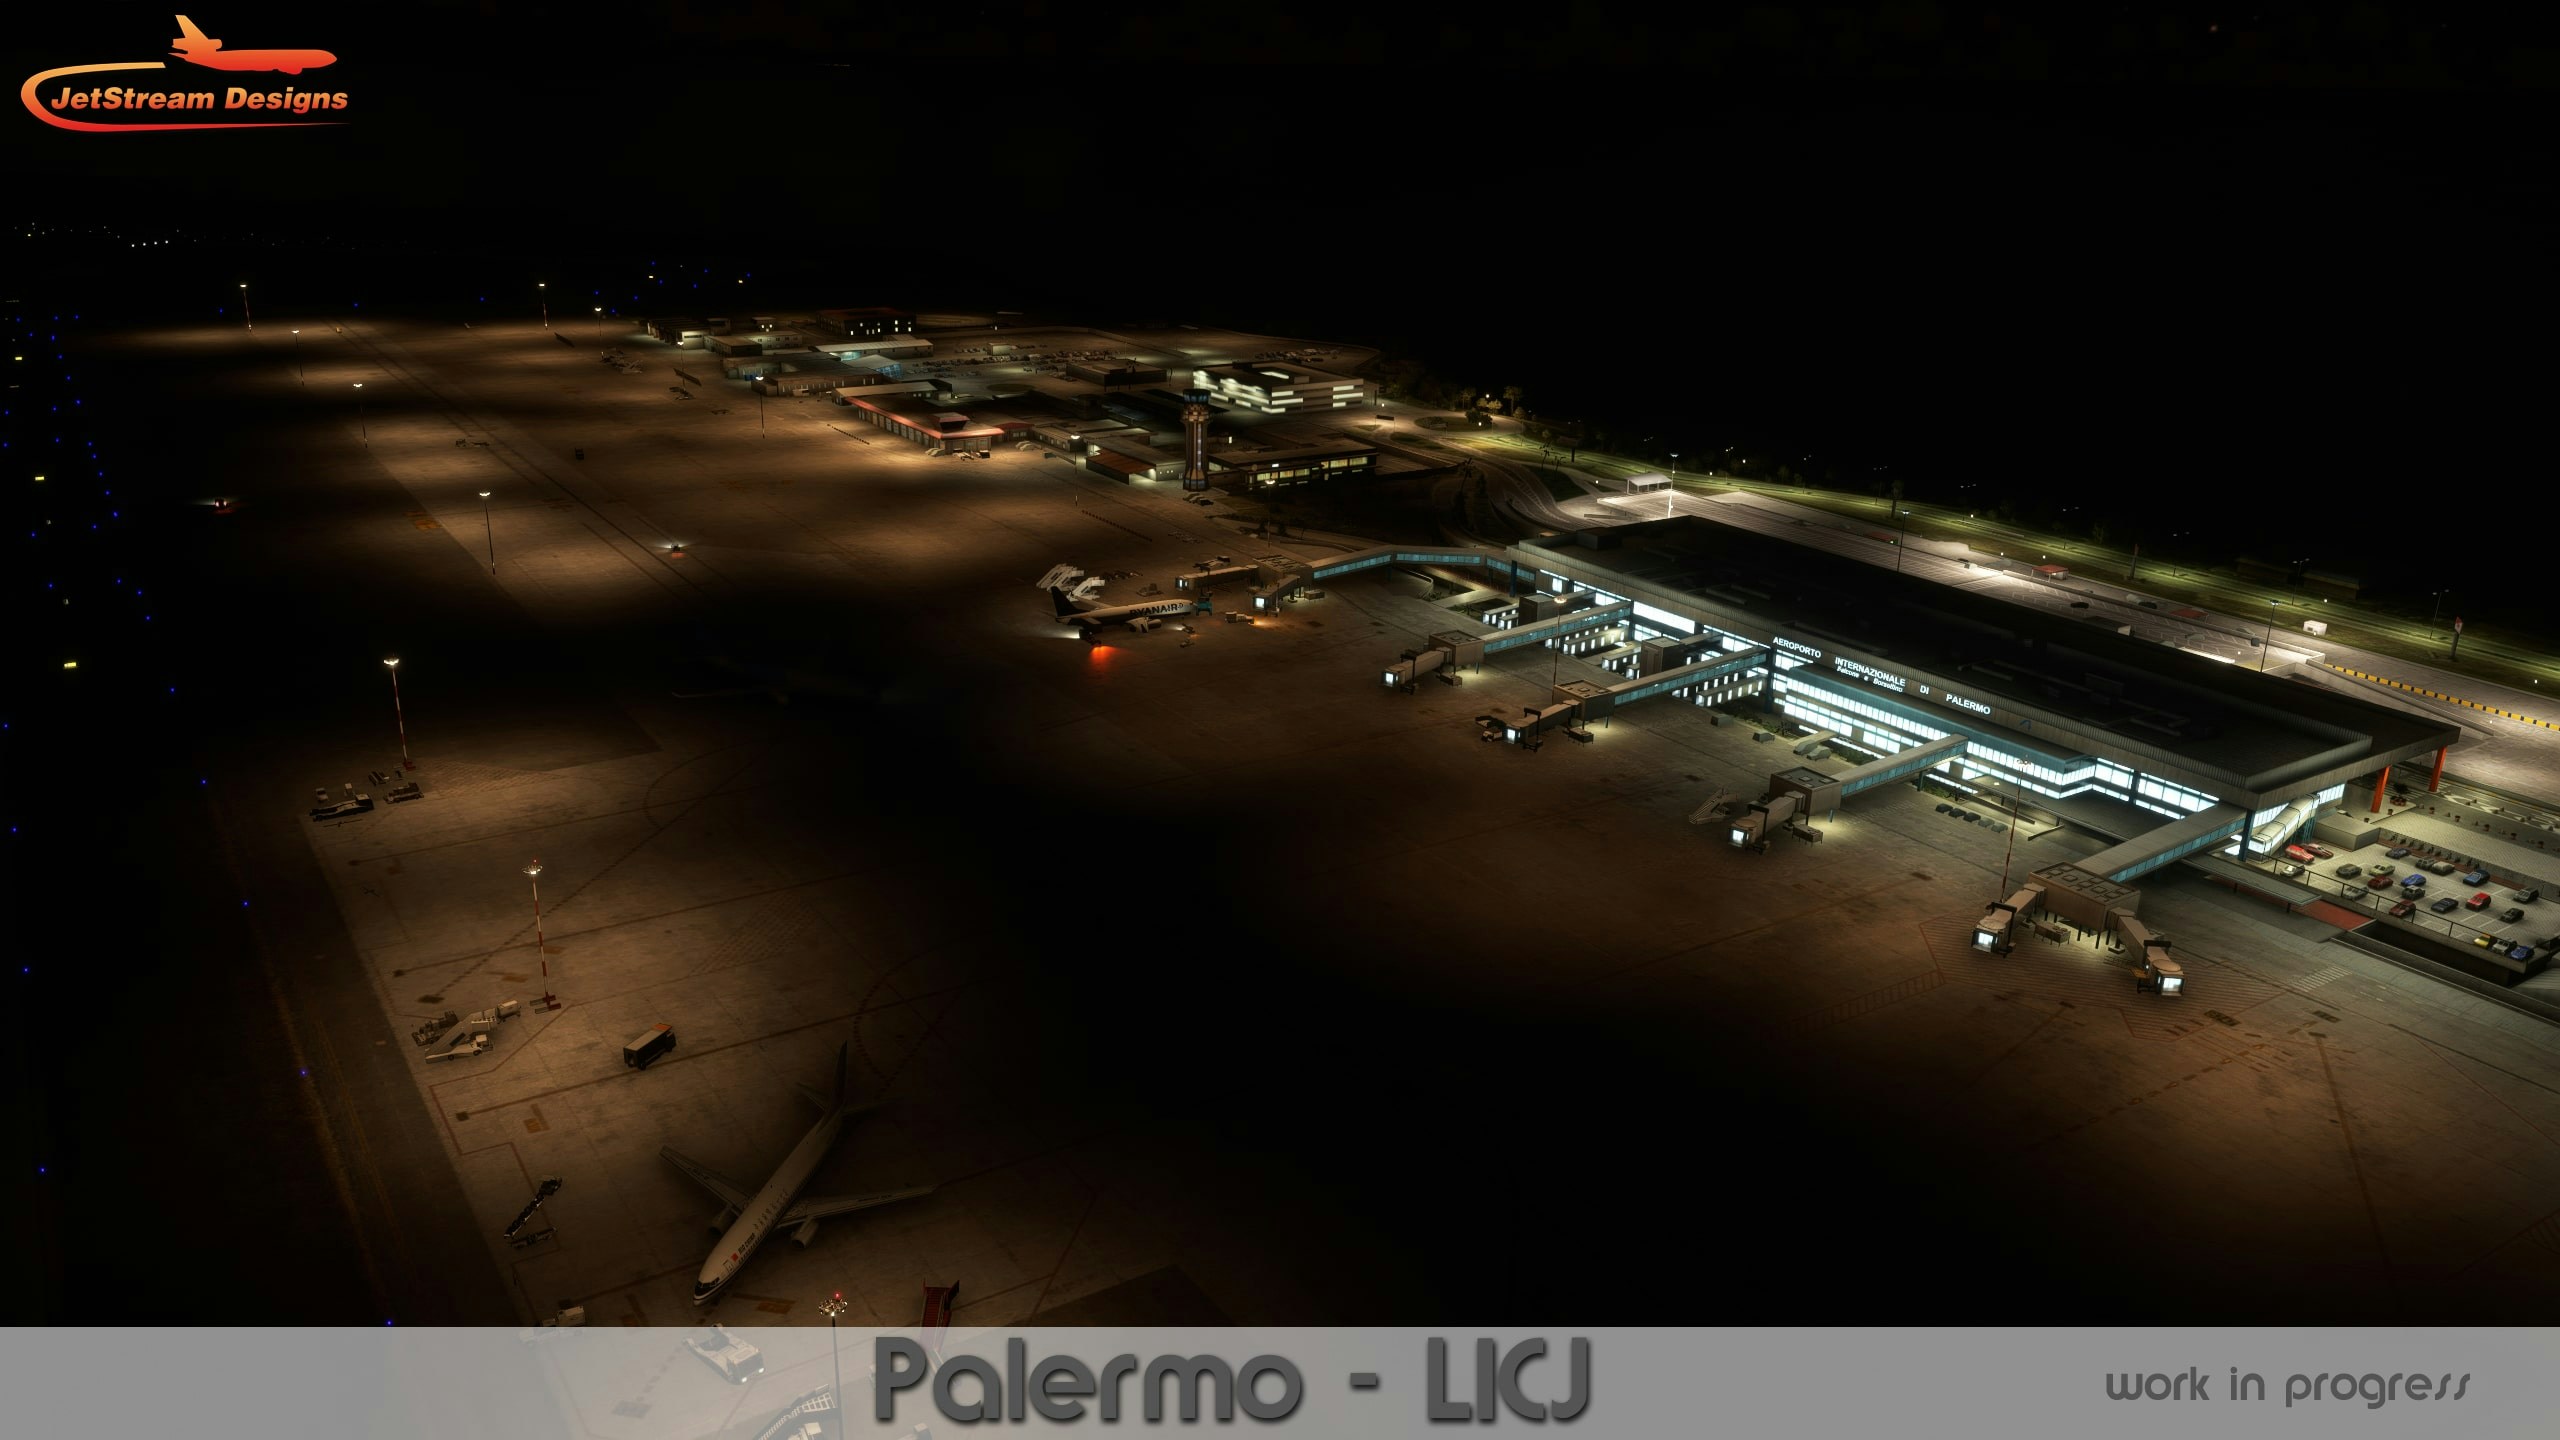 Jetstream Designs Next Product is a Three-in-One Italian Airport Bundle